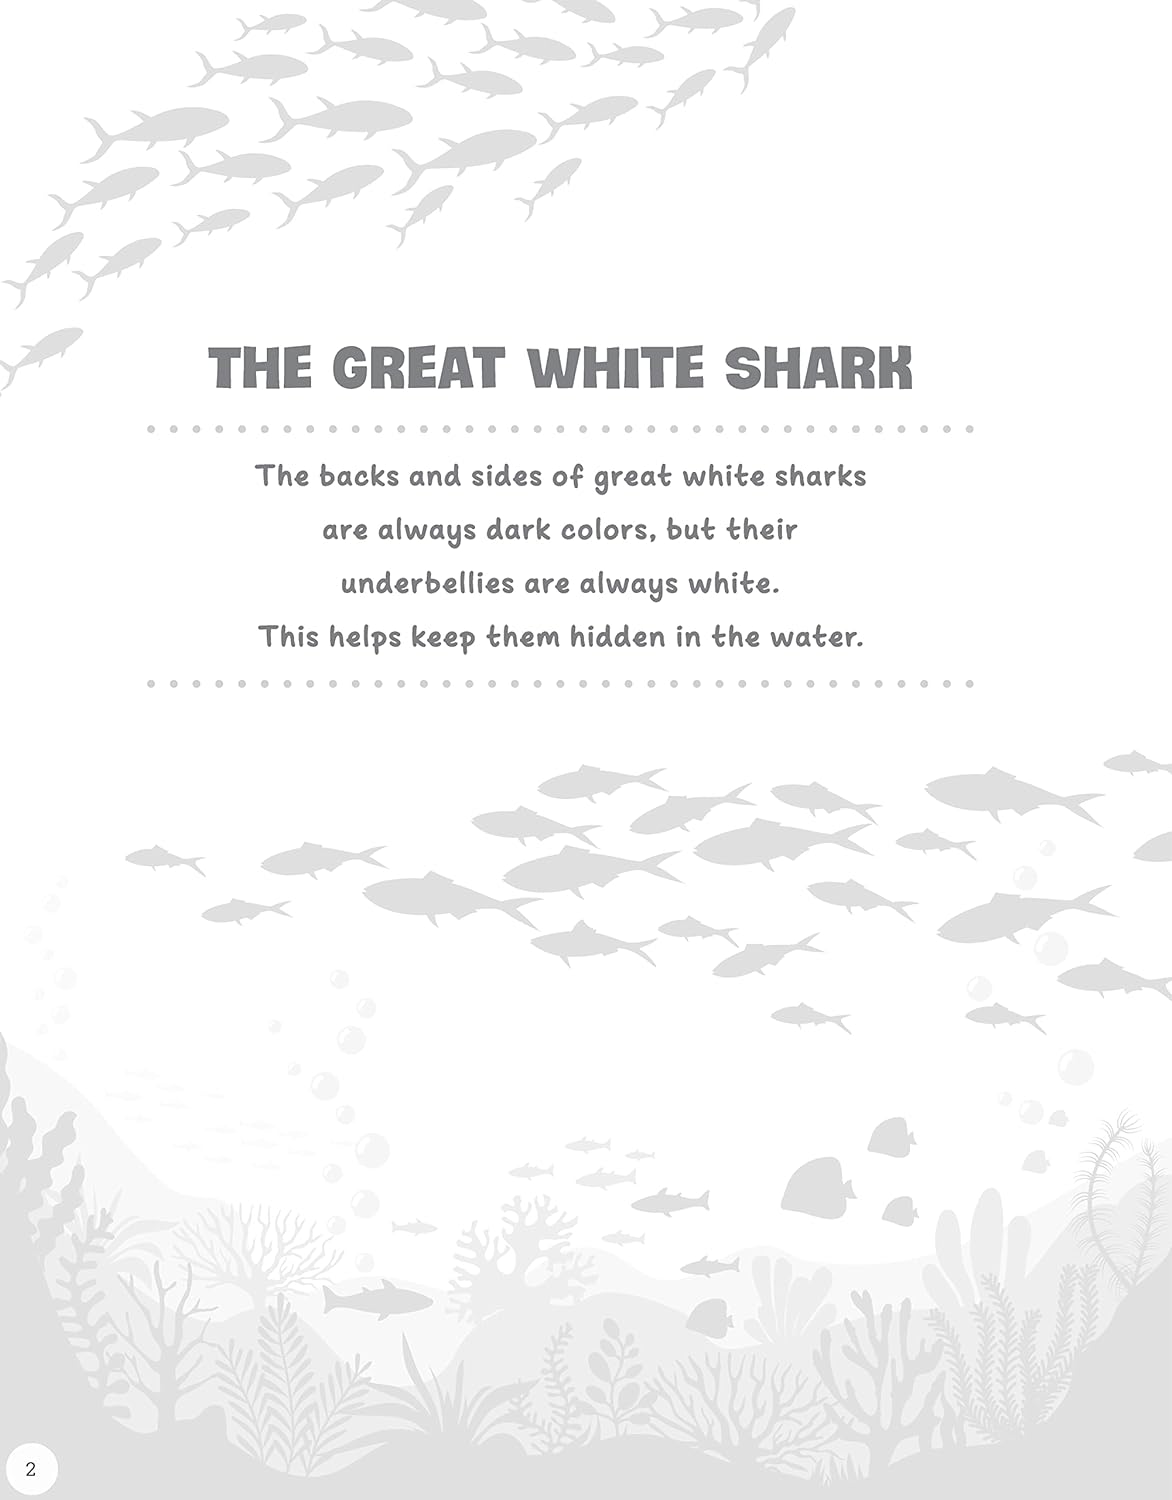 Coloring Book - Sharks and Ocean Creatures